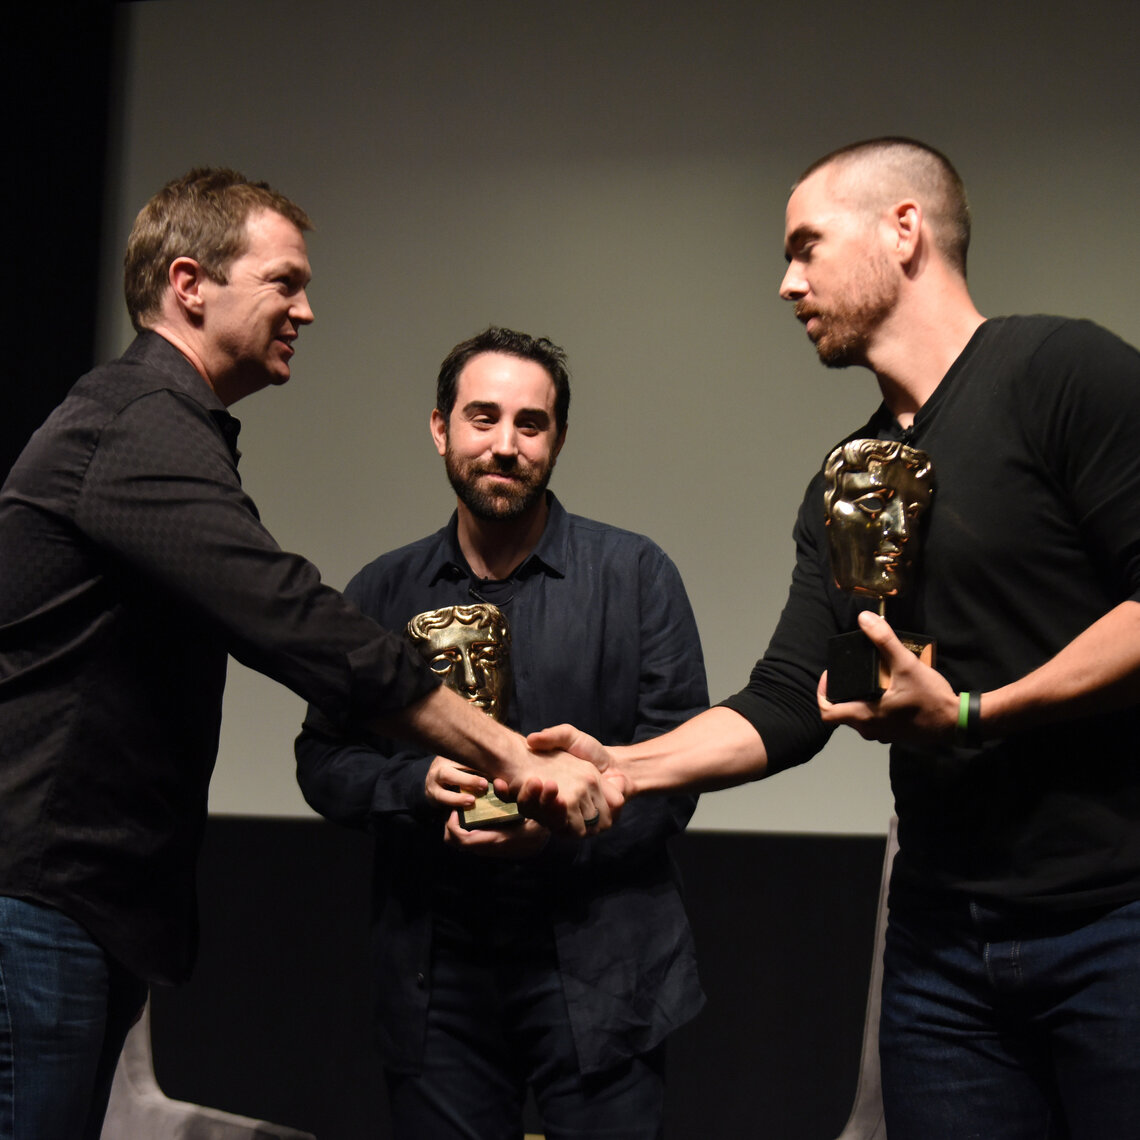 BAFTA Honours Riot Games with Special Award